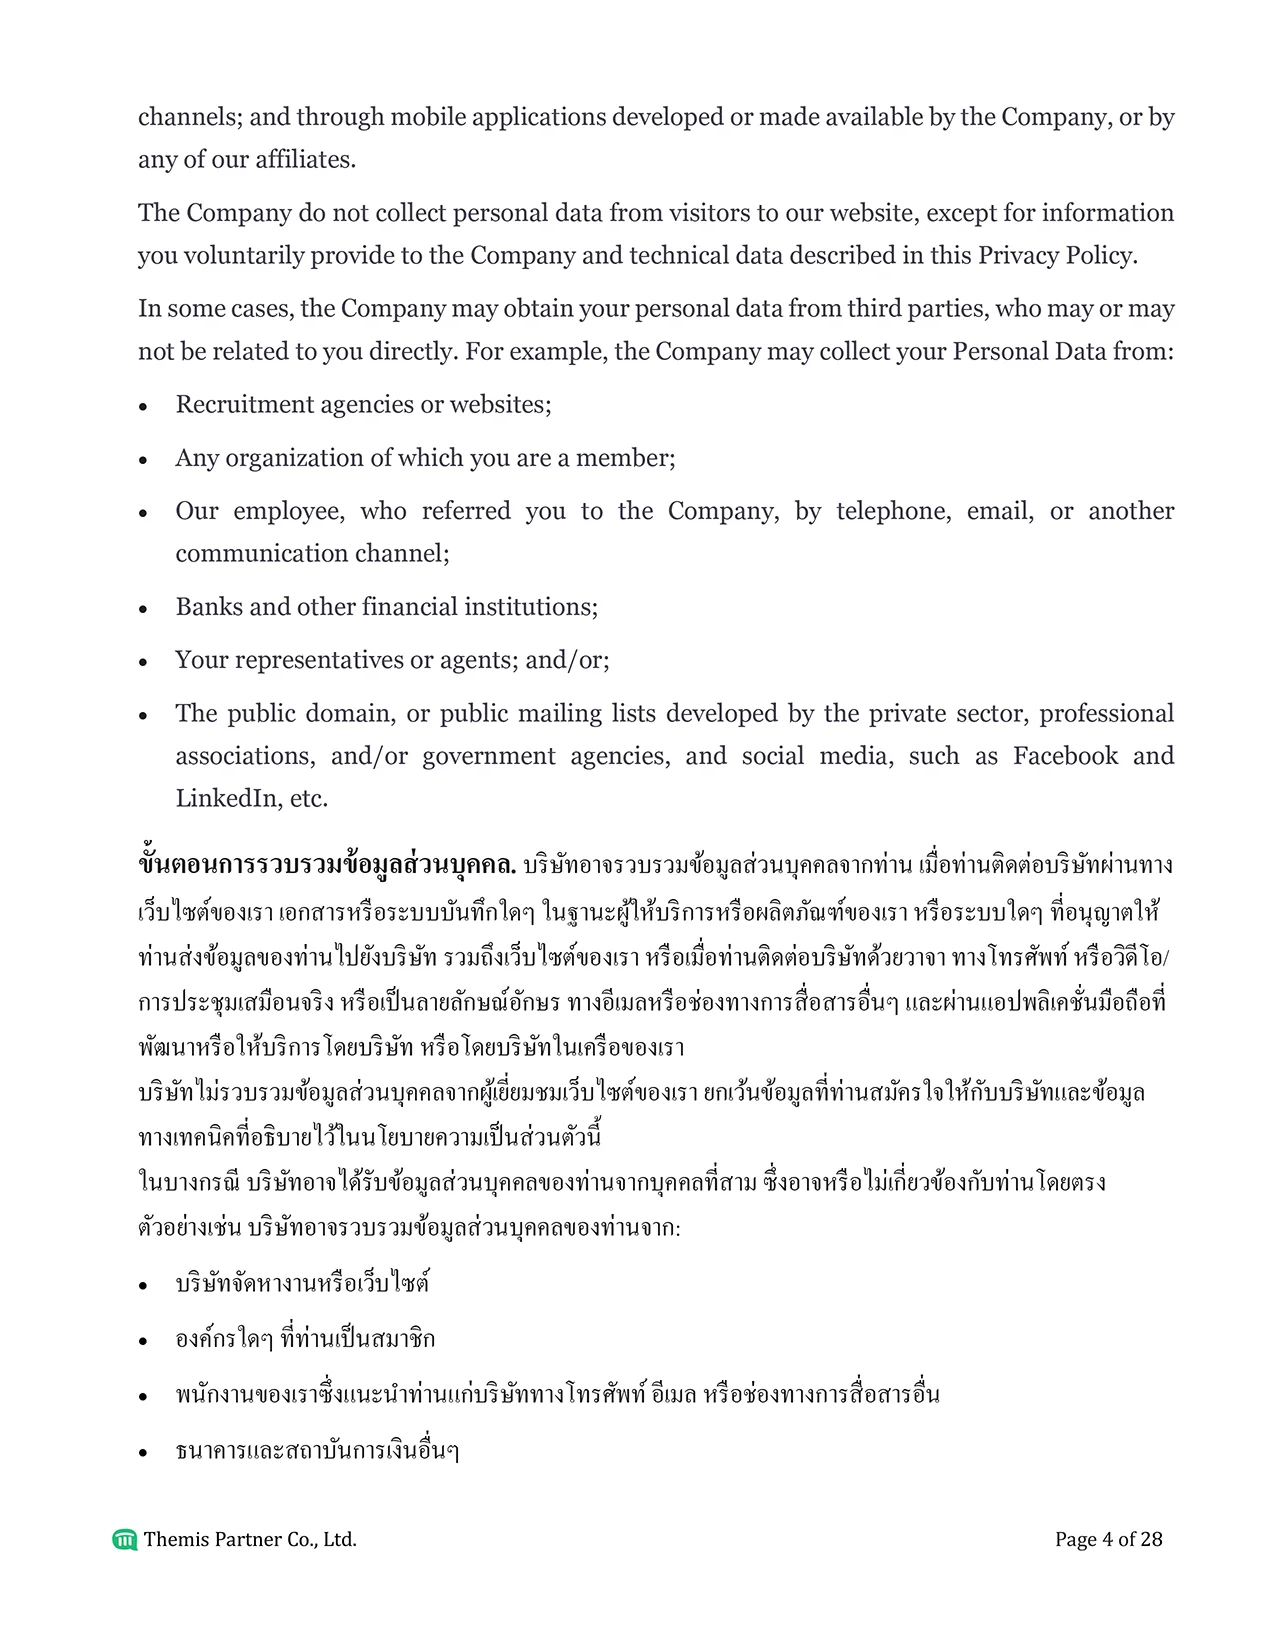 PDPA consent form and company policy Thailand 4